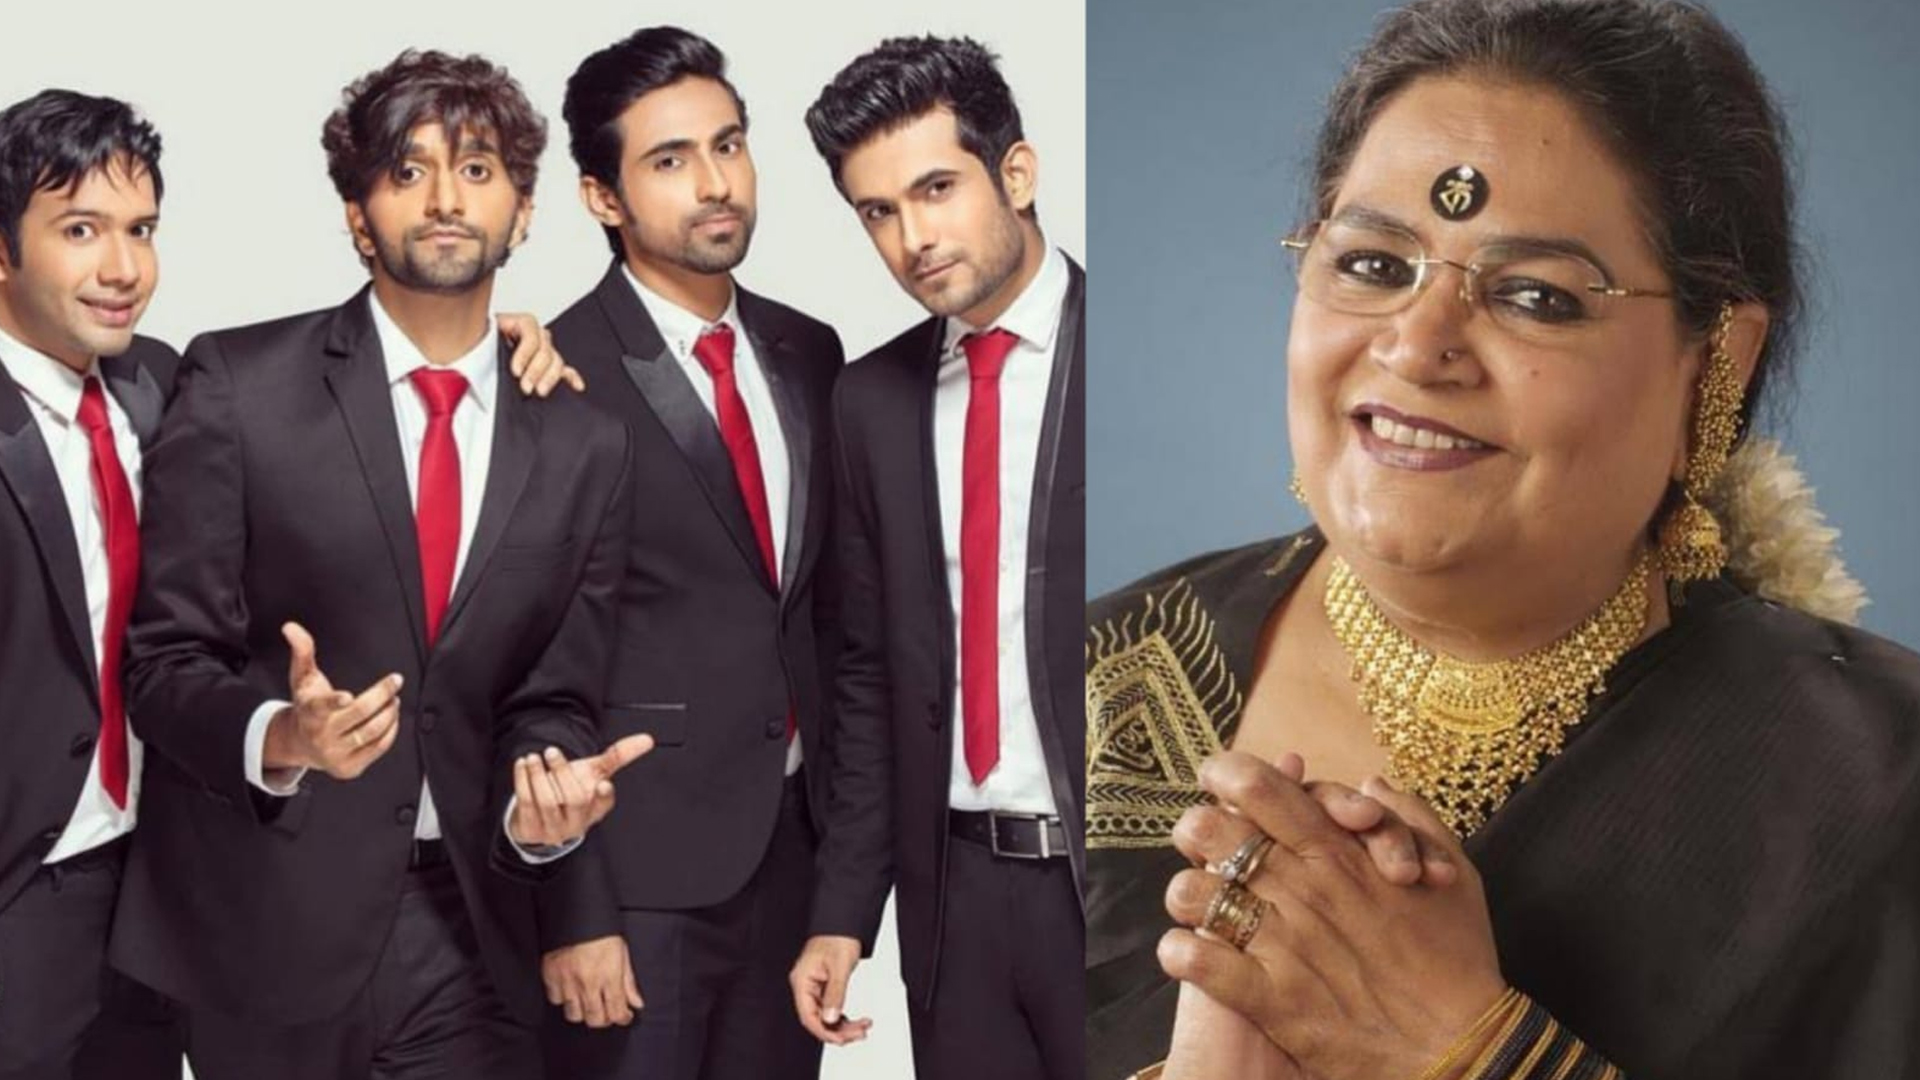 Yet another milestone for Star Plus, with legendary artist Usha Uthup and singing sensation Sanam Puri collaborating for the launch of their upcoming show Baatein Kuch Ankahee Si